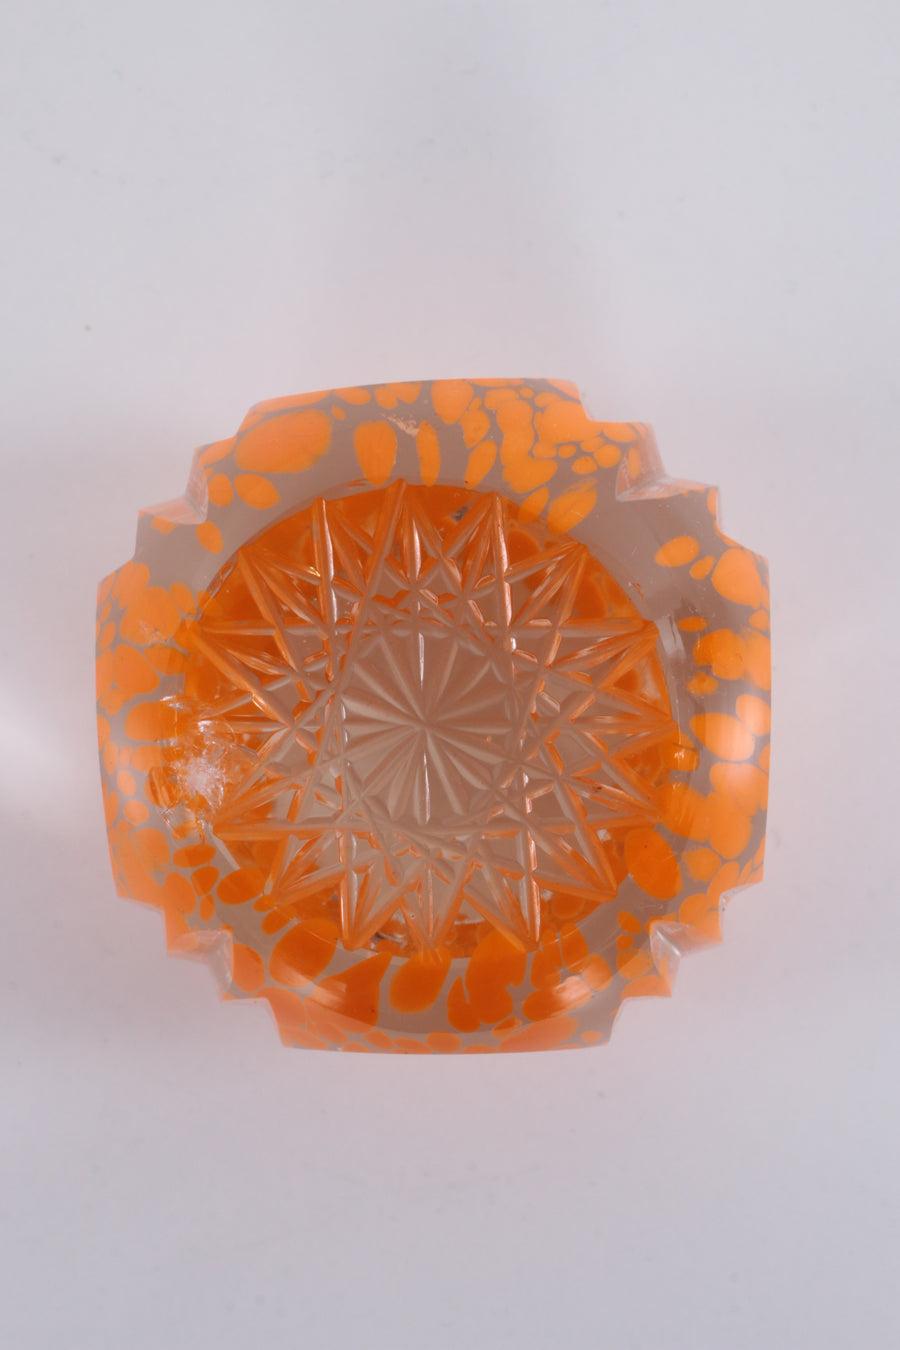 Paperweight with a Nice Sleek Finish and a Beautiful Orange Colour


Additional information: 
Dimensions: 6.5 W x 6.5 D x 7 H cm 

This sphere has damage and a number G04029 engraved.

A paperweight is an object that can be placed on a desk on top